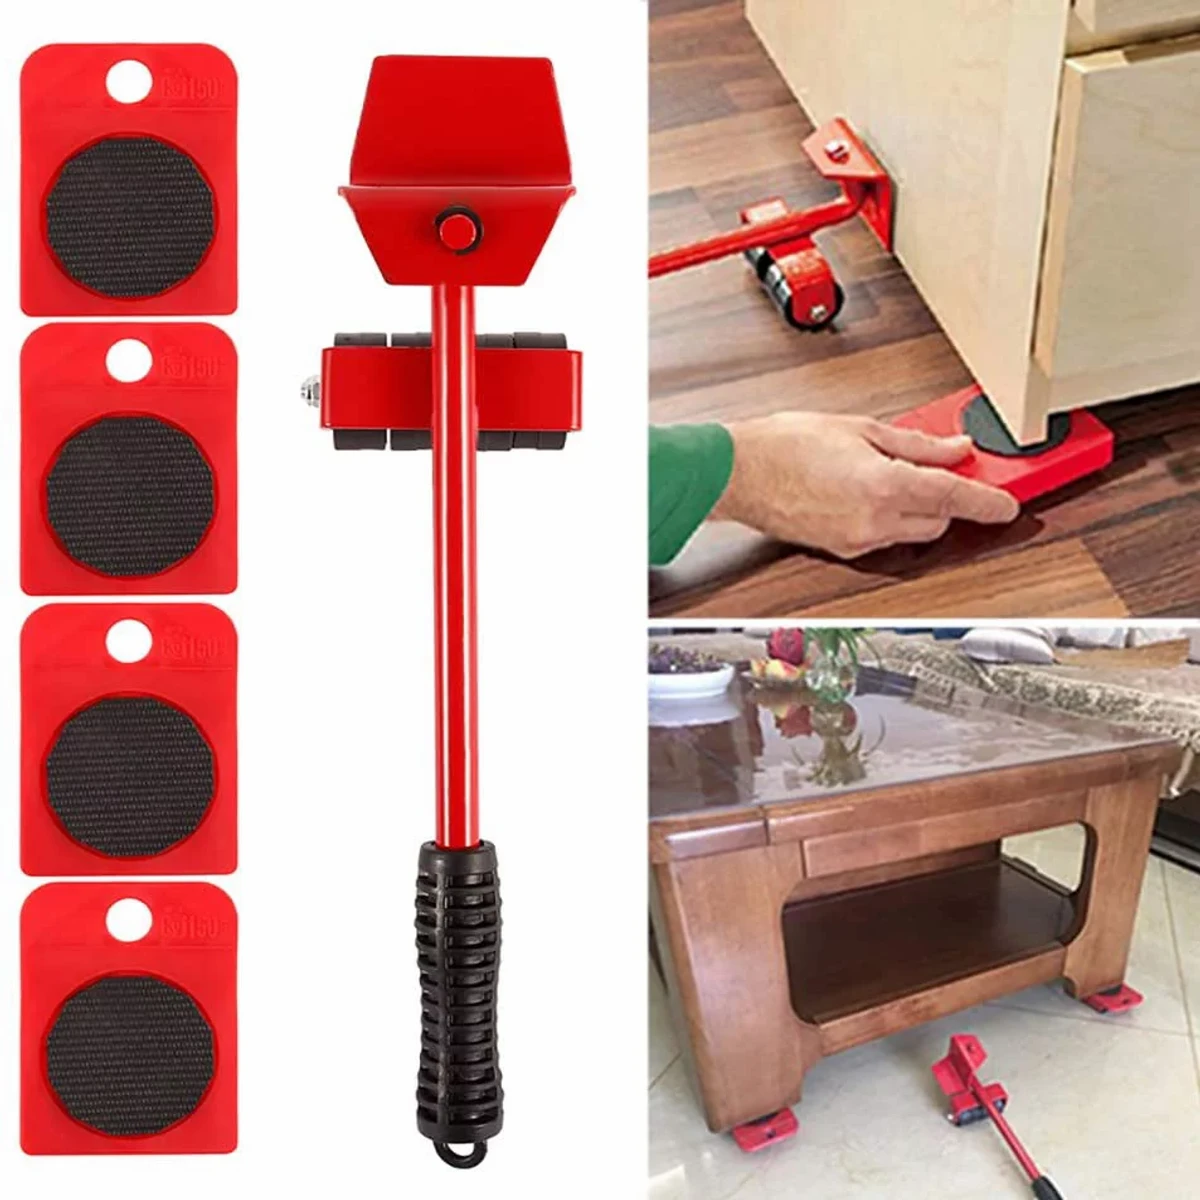 Furniture Easy Moving Tools, Furniture Moving Tool Heavy Object Mover Furniture Transport Lifter & Furniture Slides 4 Wheeled Mover Roller+ 1 Wheel Bar Hand Tools Set, Furniture Lifter Mover Tool Set Furniture Lifting Wheels (5PCS)